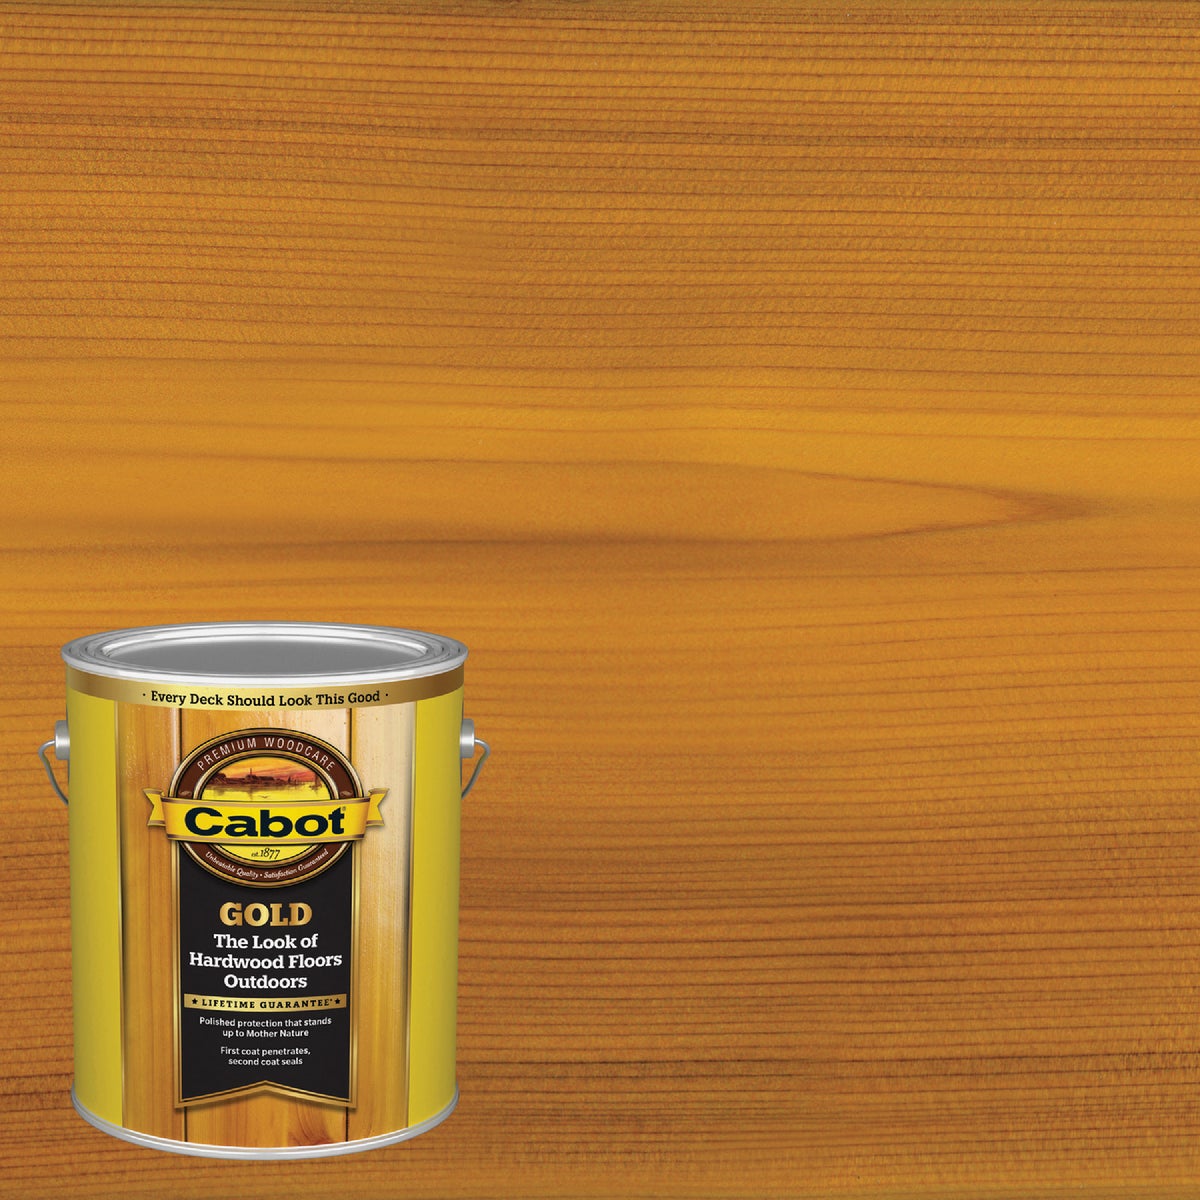 Cabot Gold Exterior Stain, Sun-Drenched Oak, 1 Gal.